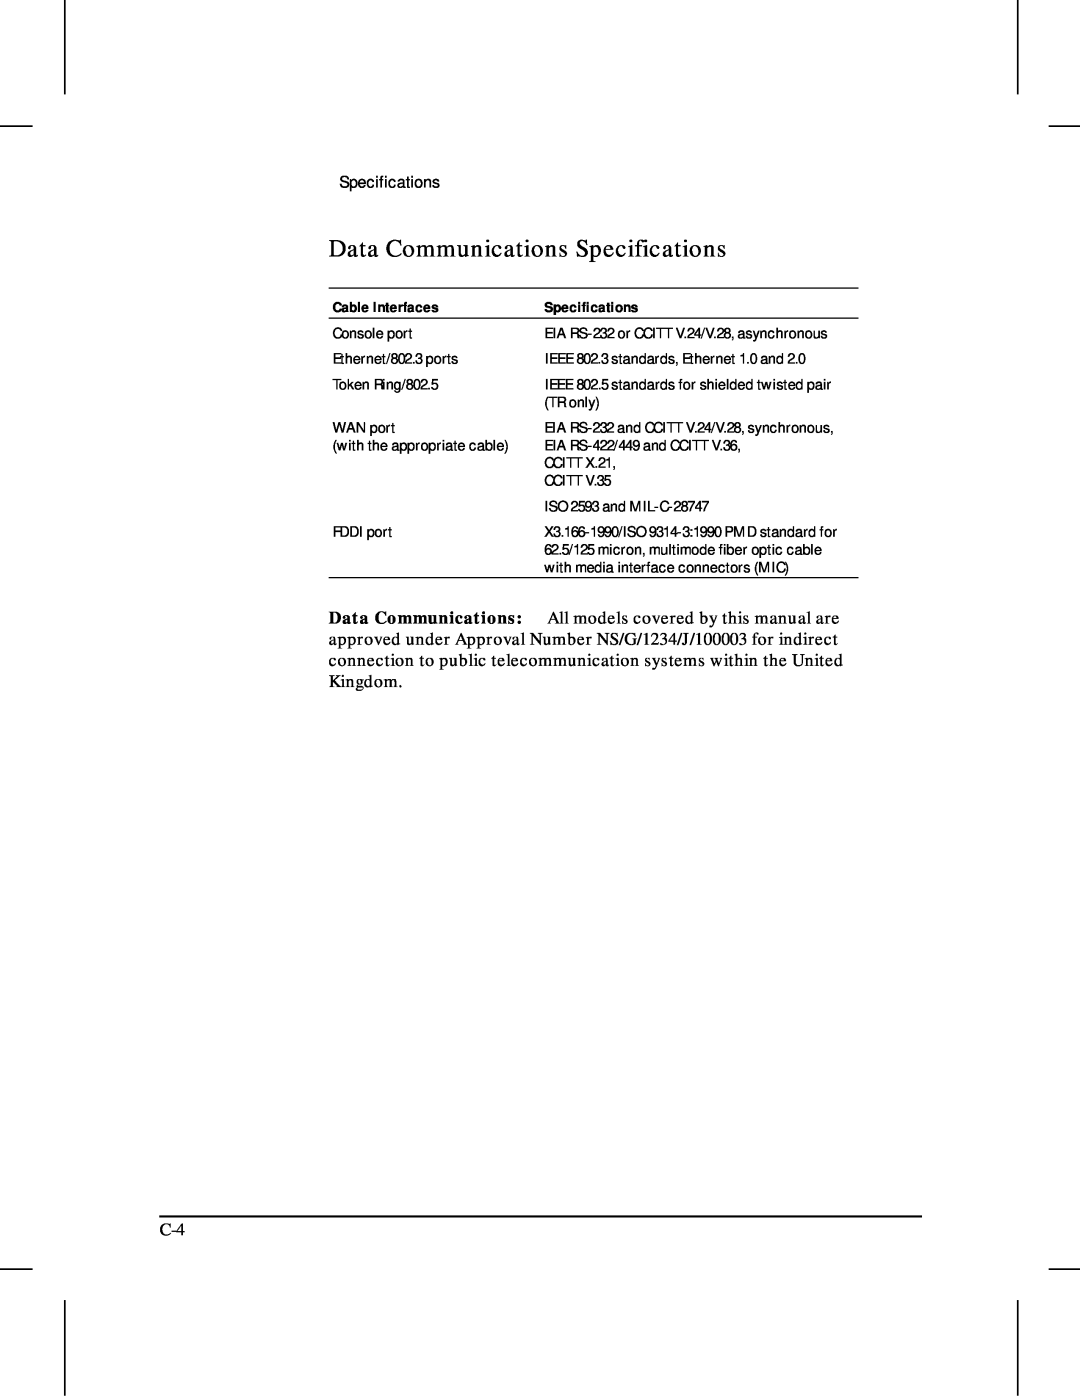 HP 480 manual Data Communications Specifications, Cable Interfaces 